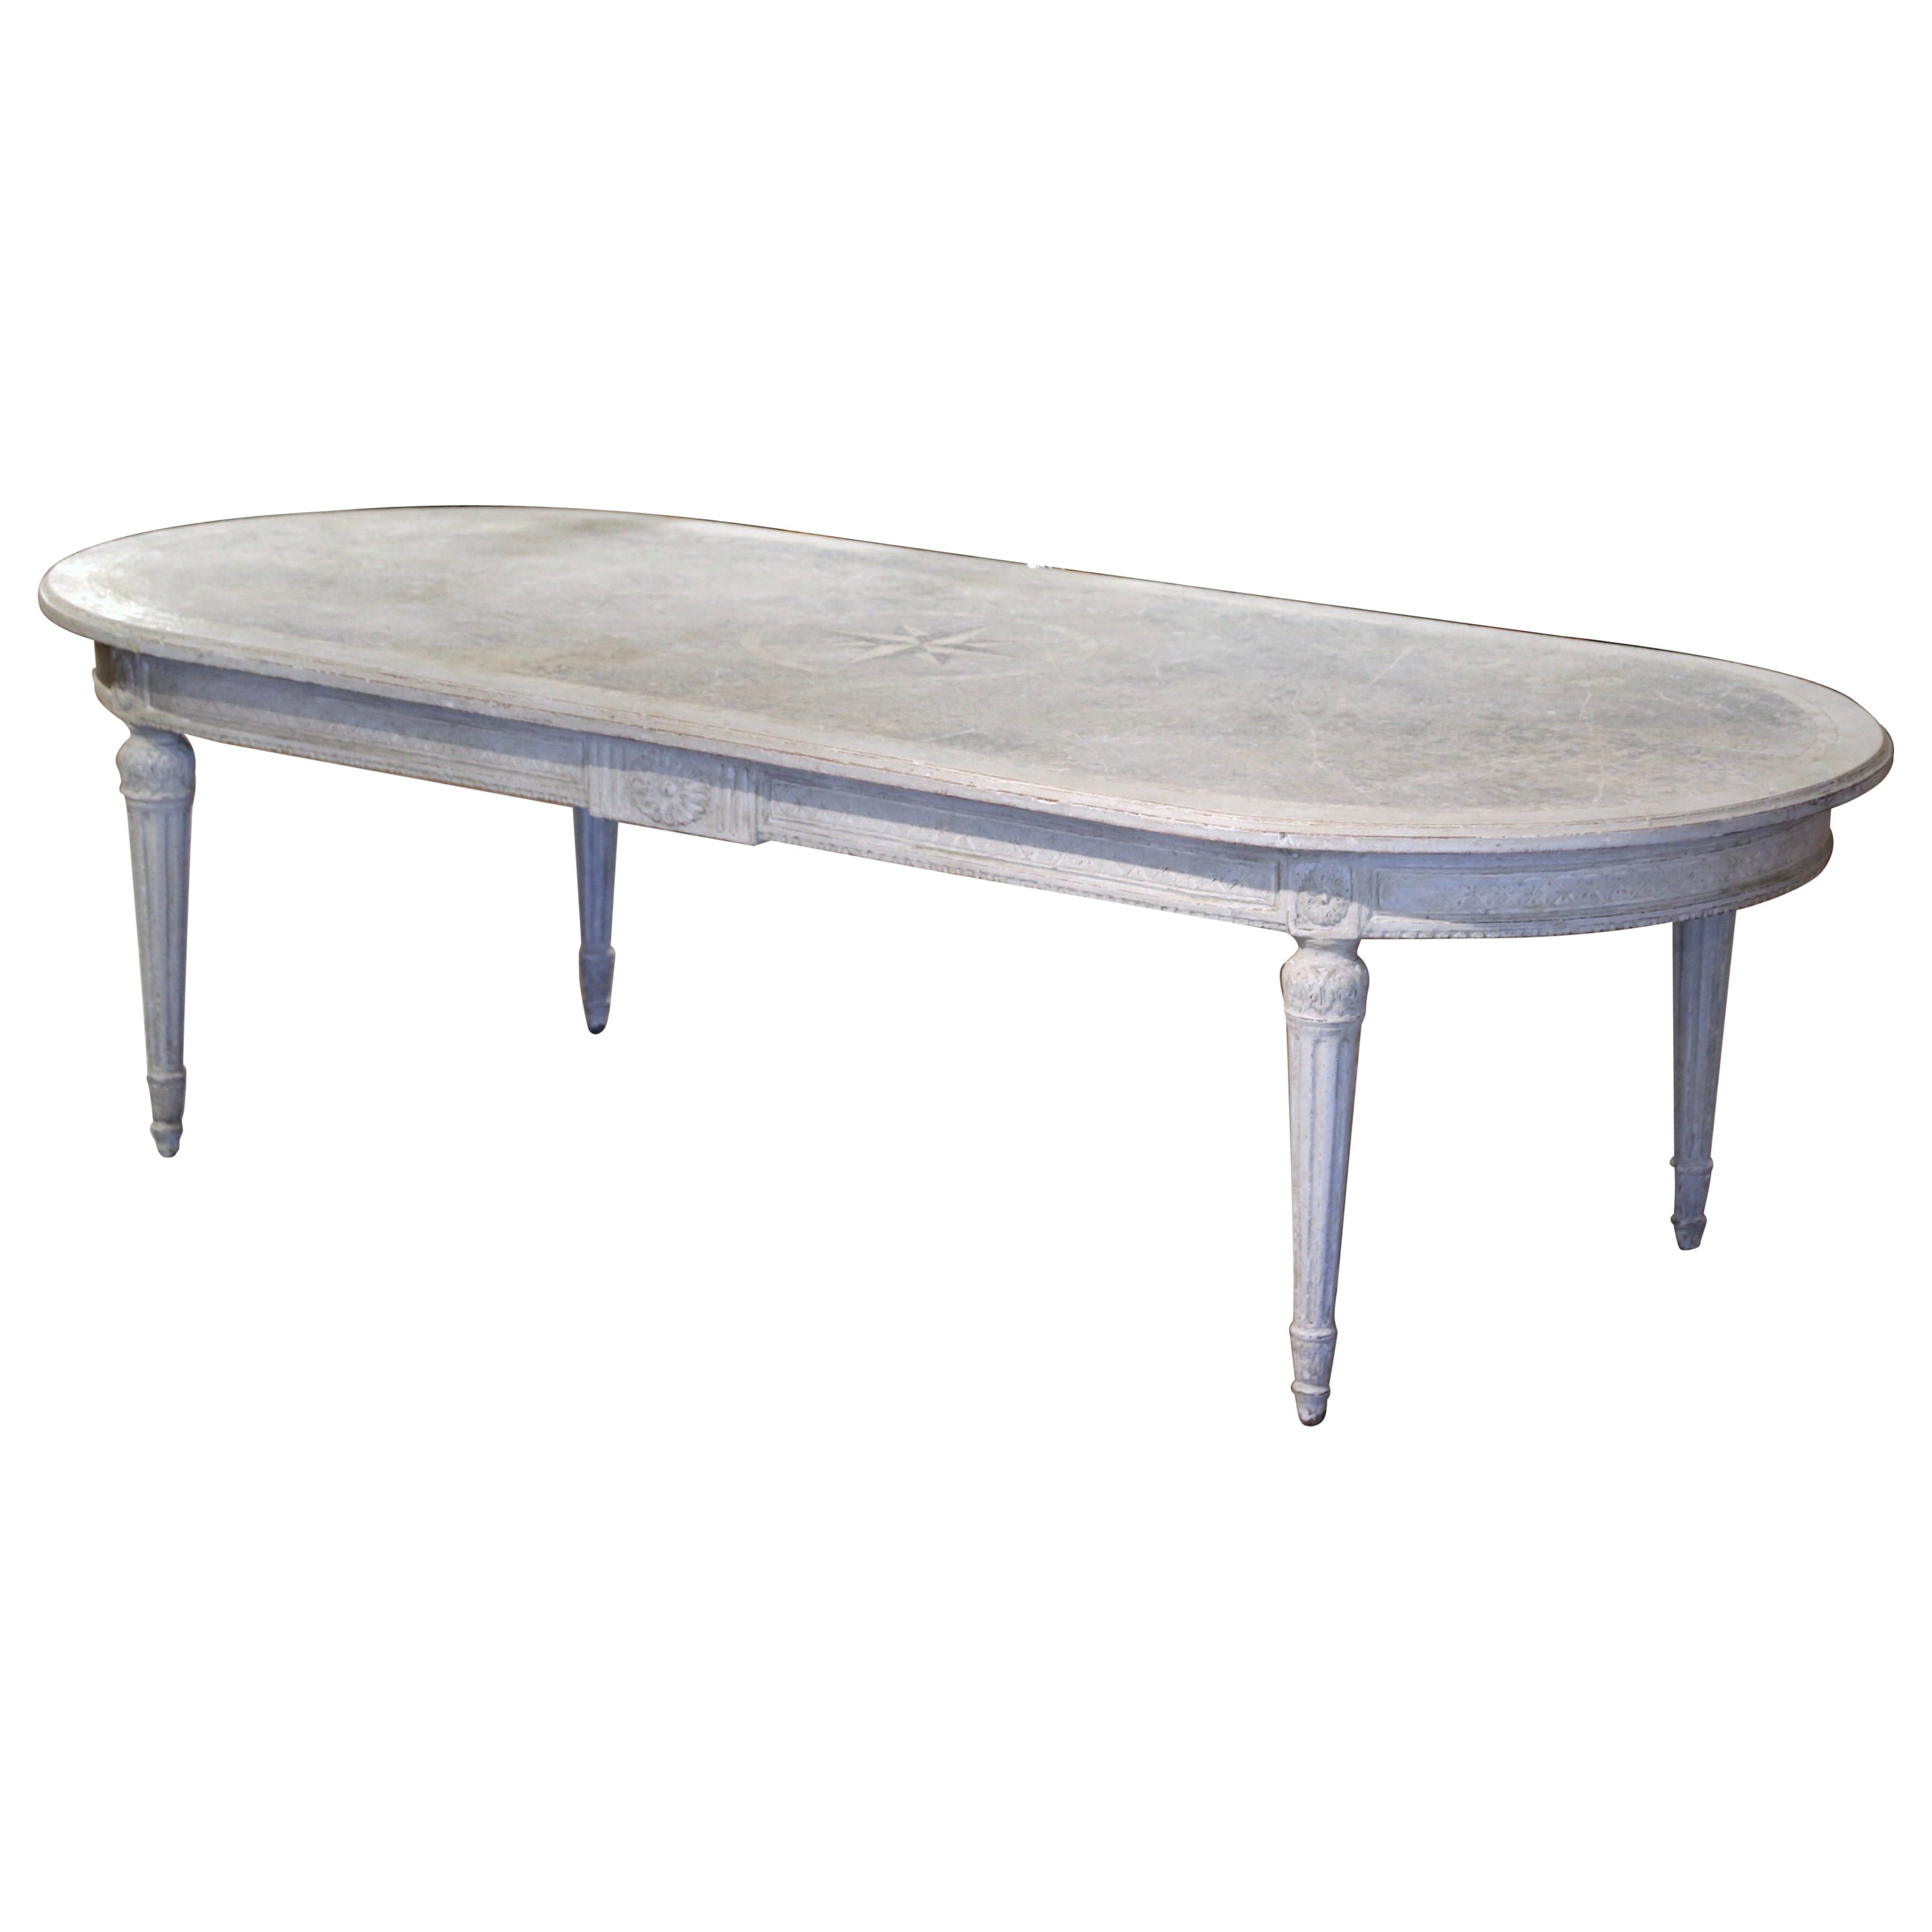  19th Century French Louis XVI Carved and Painted Oval Dining Room Table  For Sale